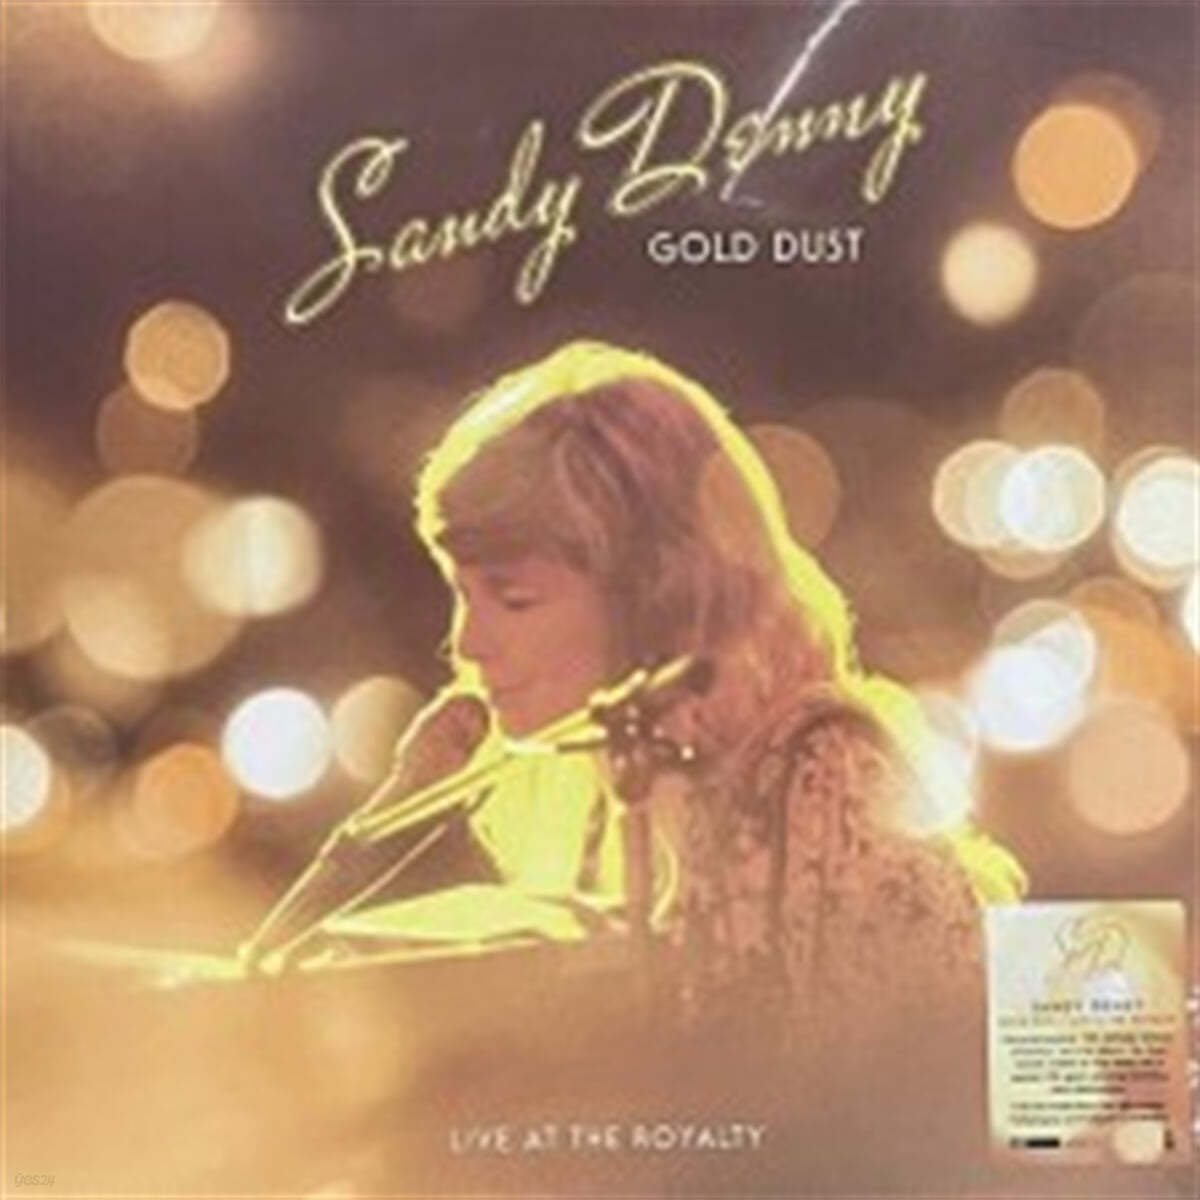 Sandy Denny (샌디 데니) - Gold Dust  Live At The Royalty  [LP]